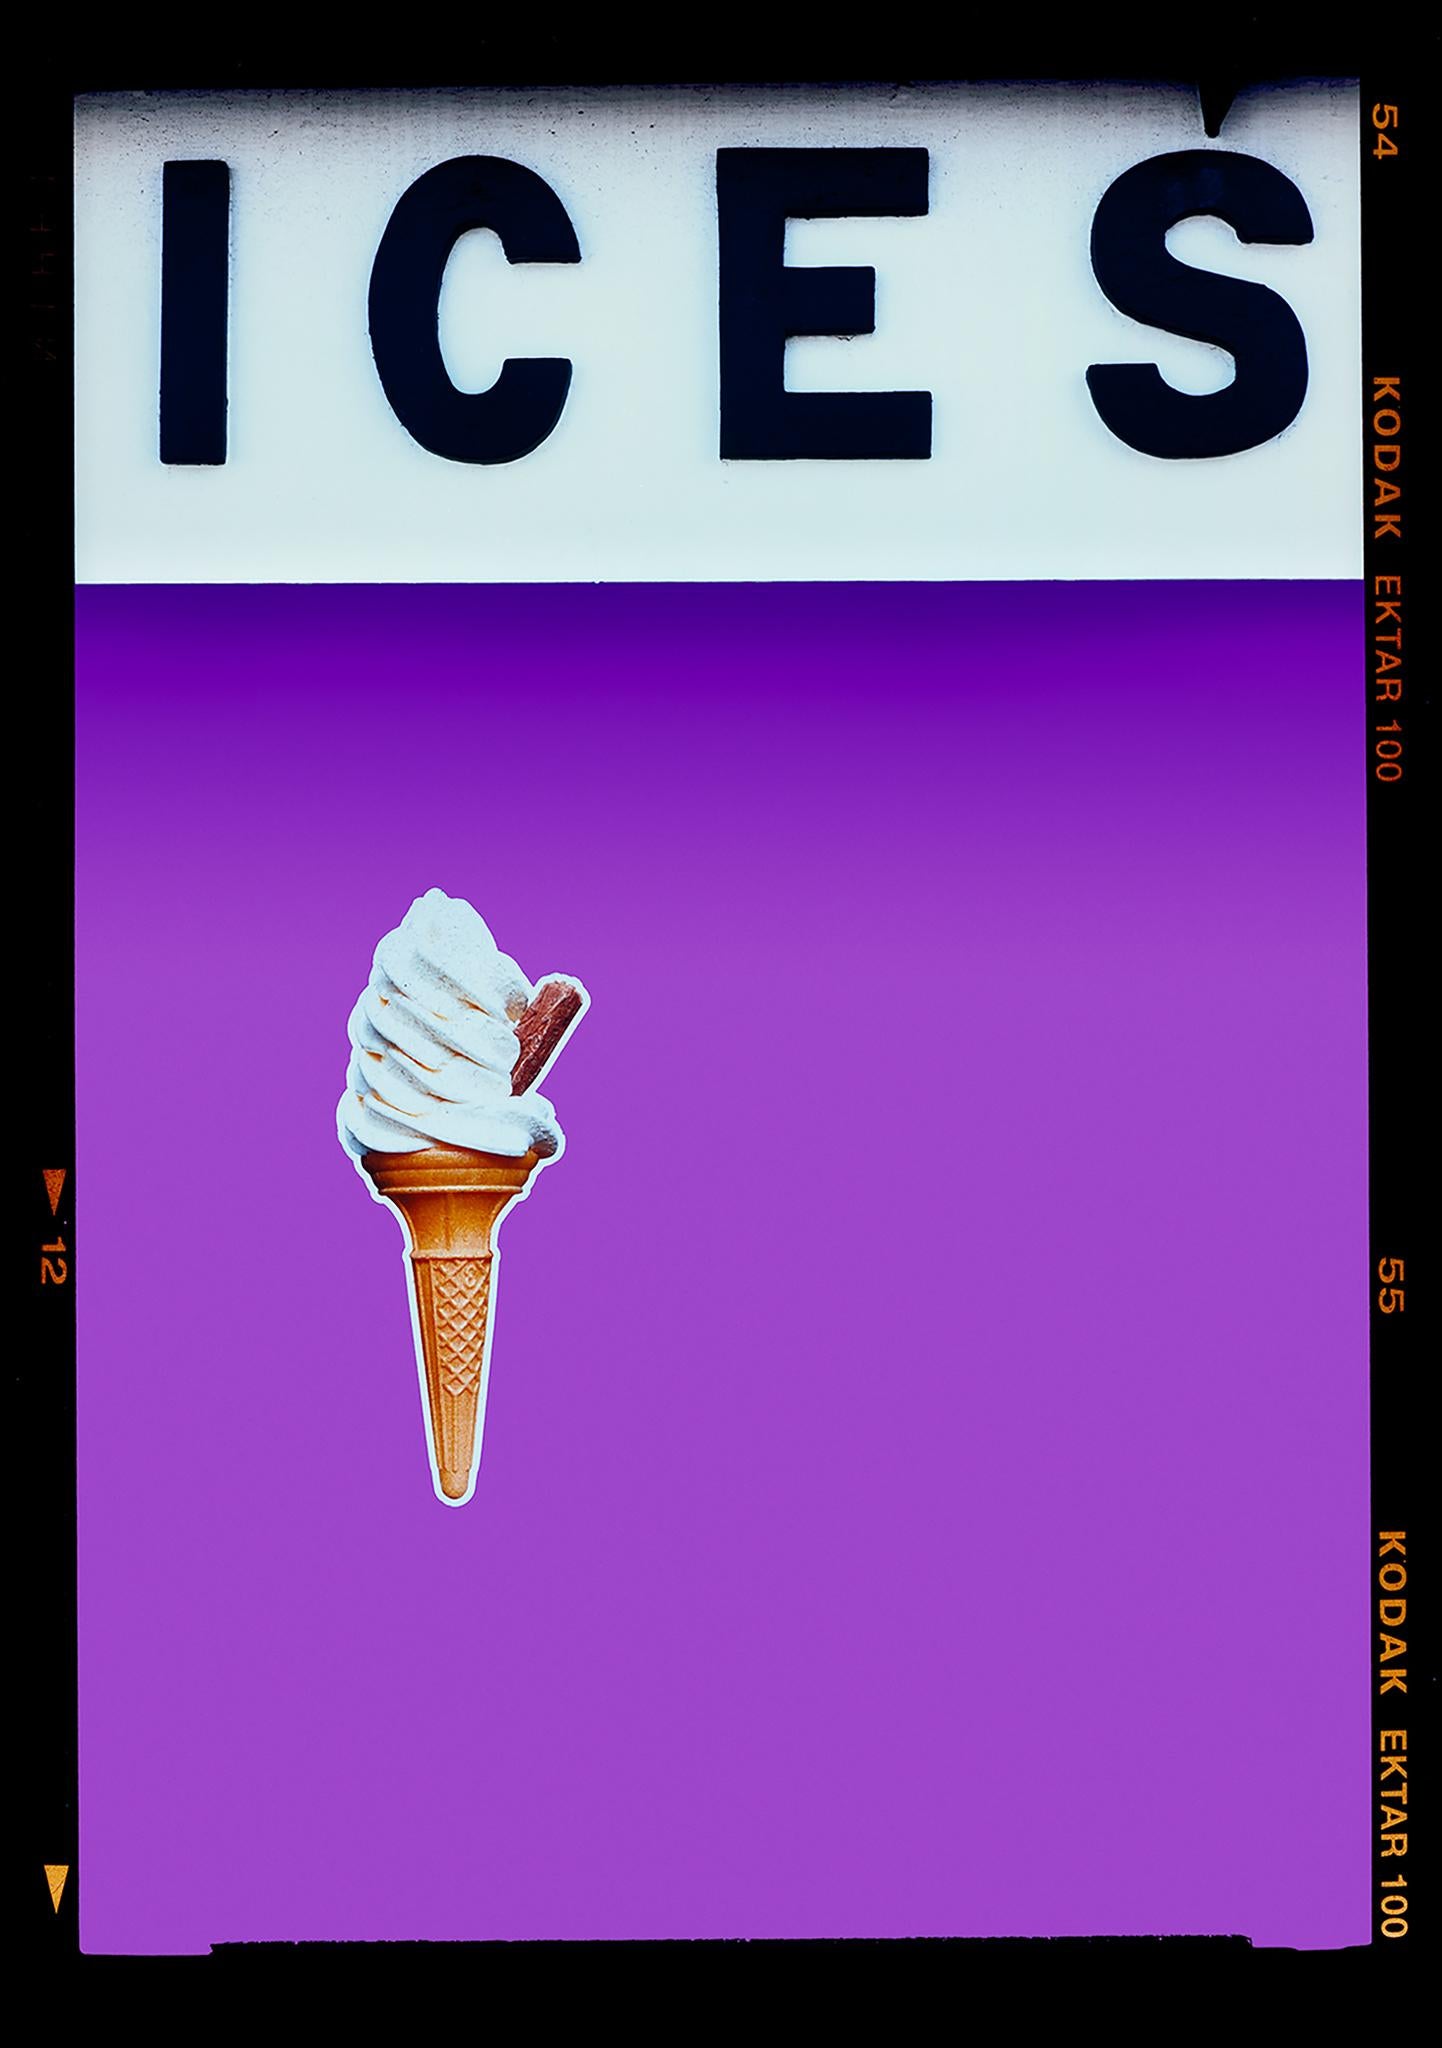 ICES Viridian Green, Lilac Purple and Melondrama Coral Orange, bold colour blocking pop art street photography from Richard Heeps series, On-Sea.
Created as an ode to childhood visits to grandparents living on the Sussex coast, the artwork tells the